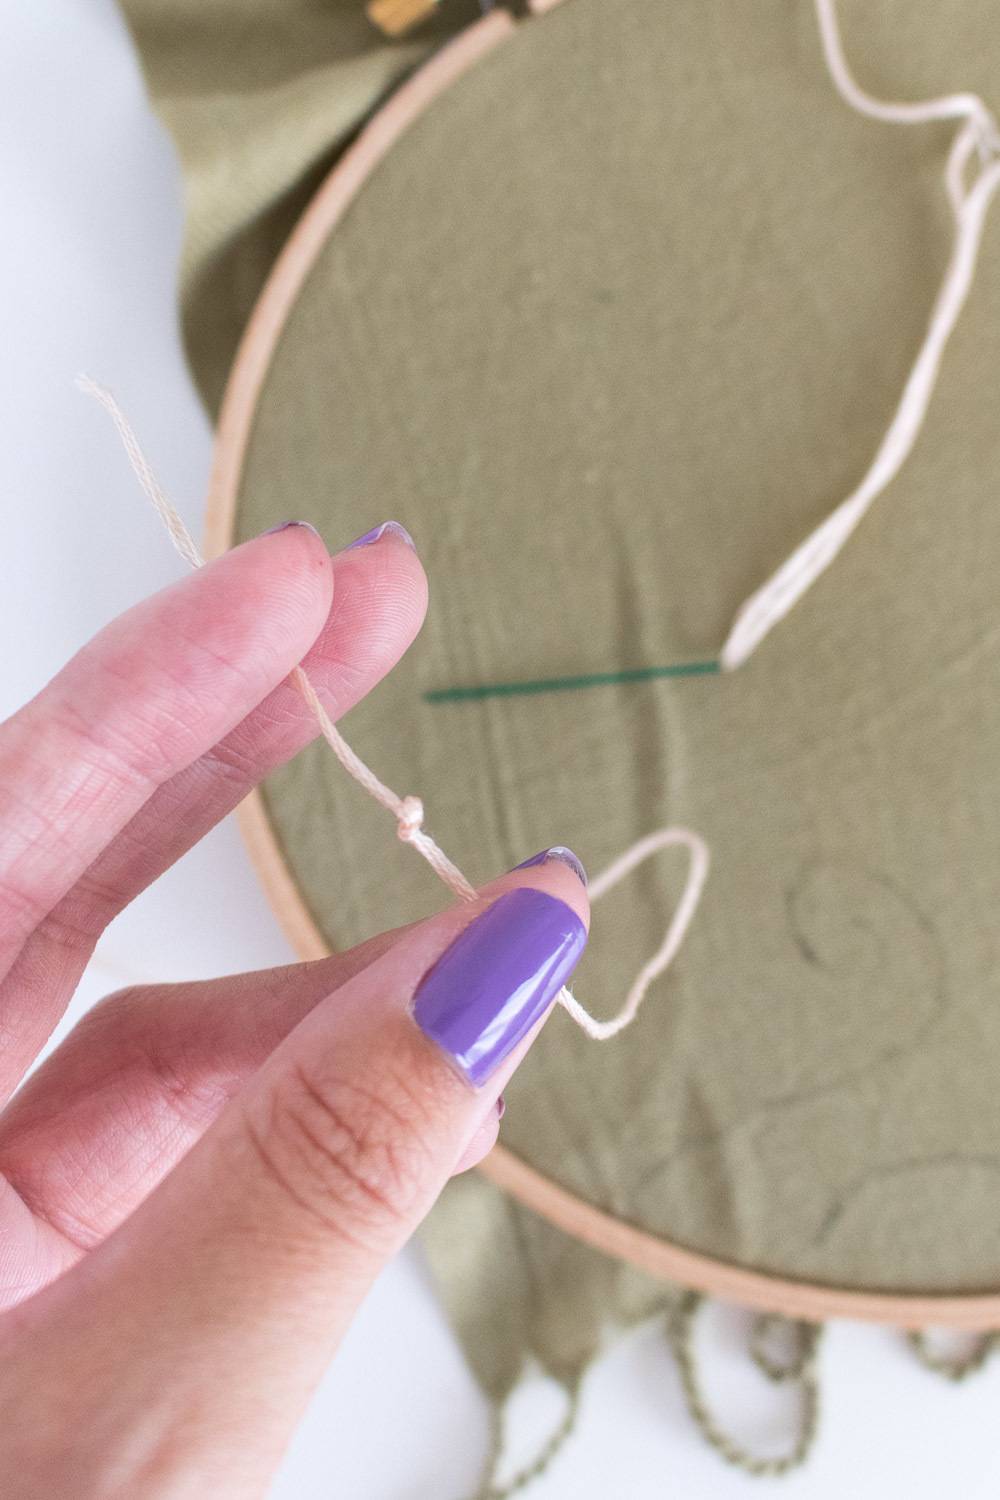 A woman's hand holding a loop while doing some sort of needlecraft.